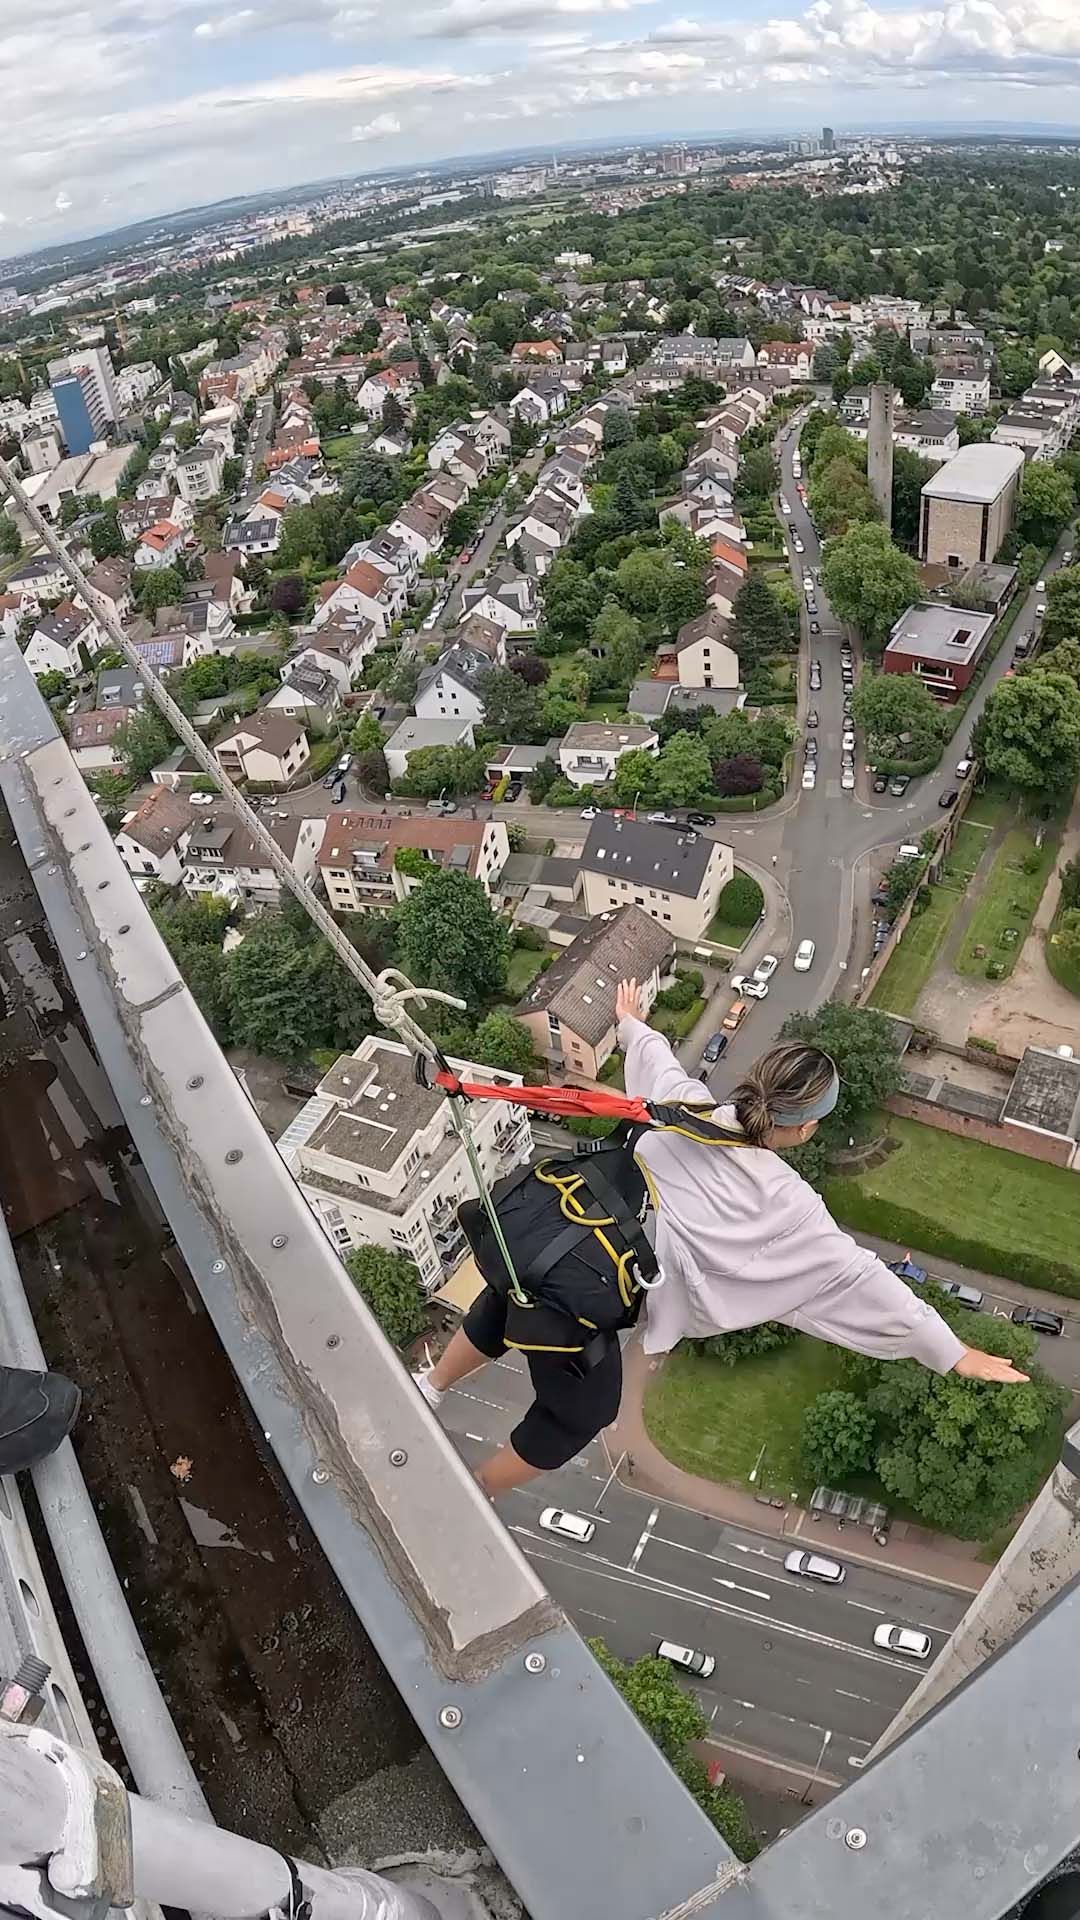 Khuyen hanging from a 27 story building